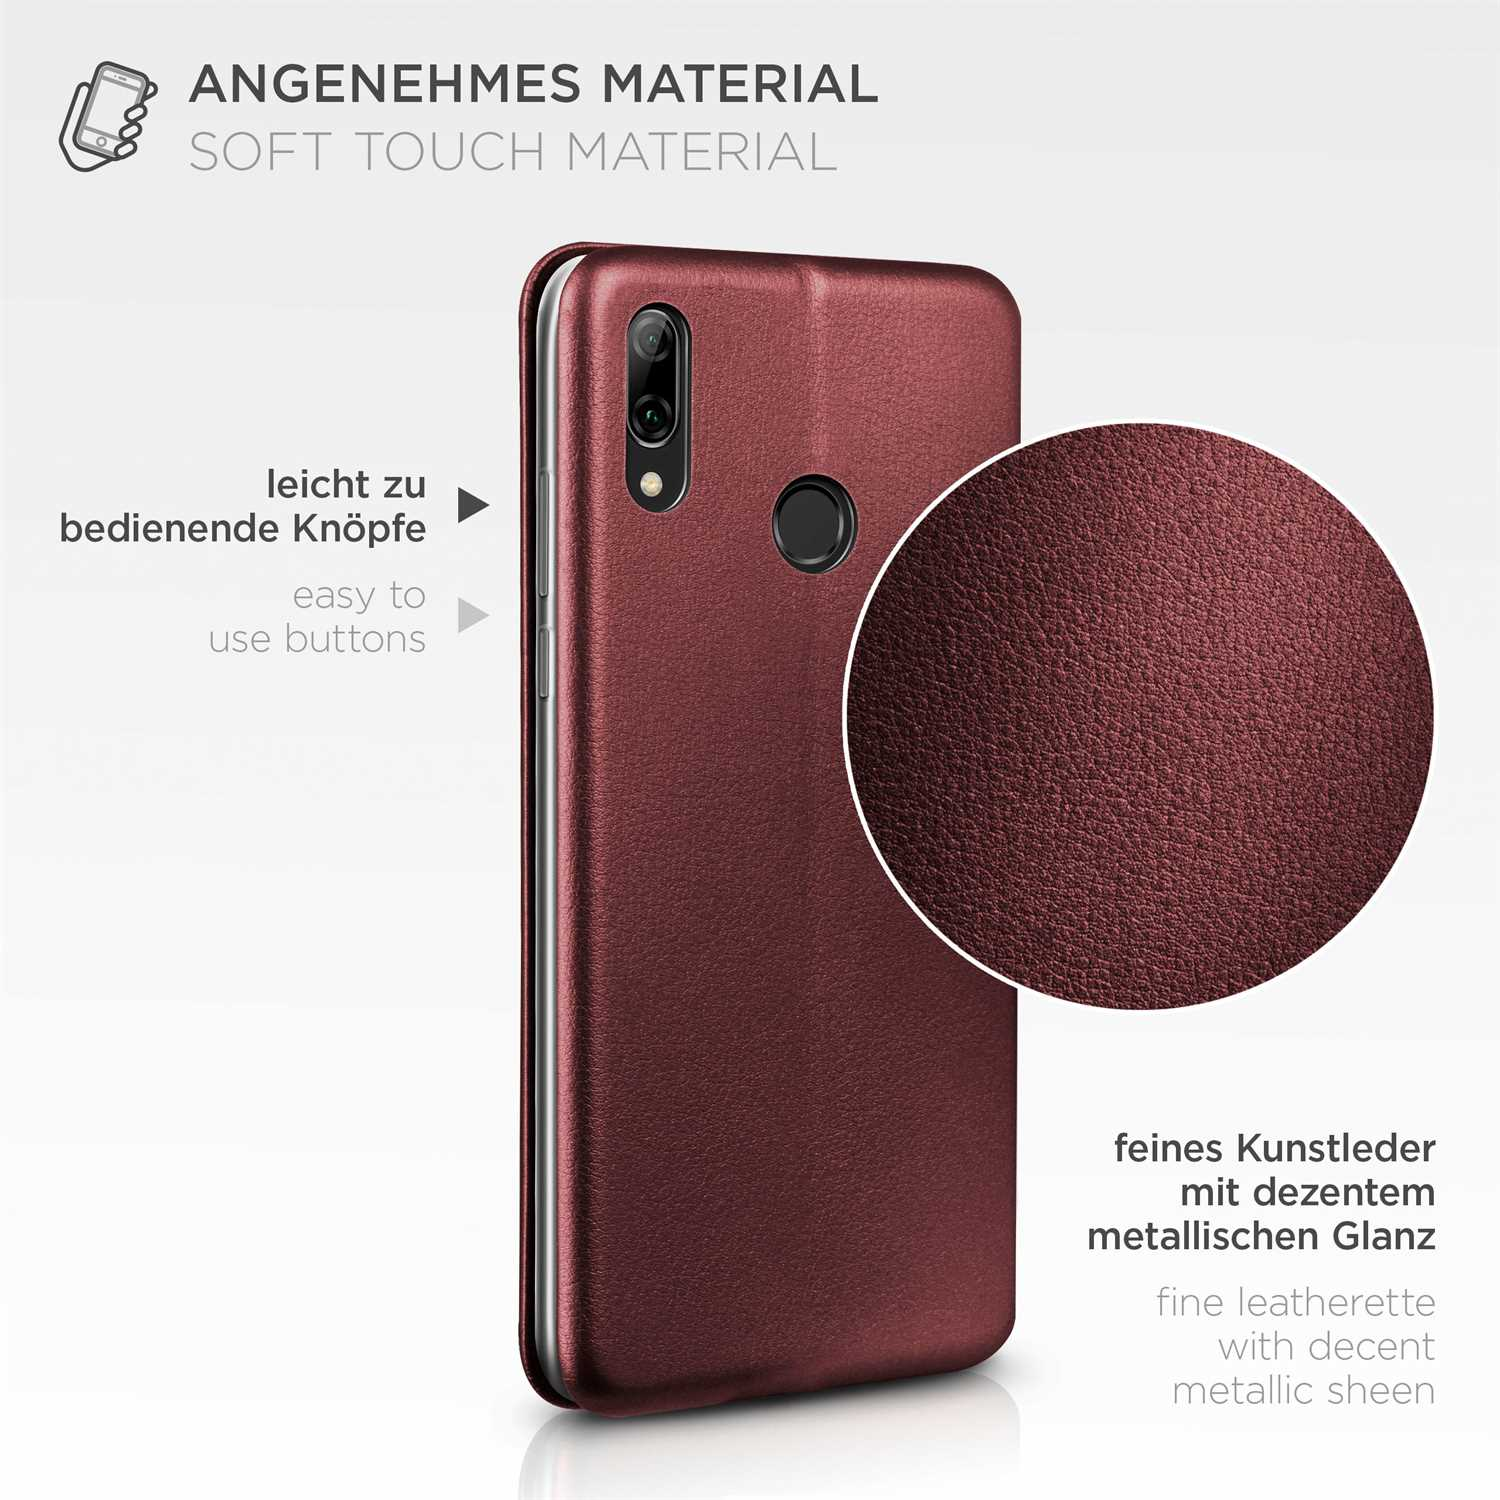 2019, - Huawei, Burgund P Red Flip Business ONEFLOW Case, Cover, smart